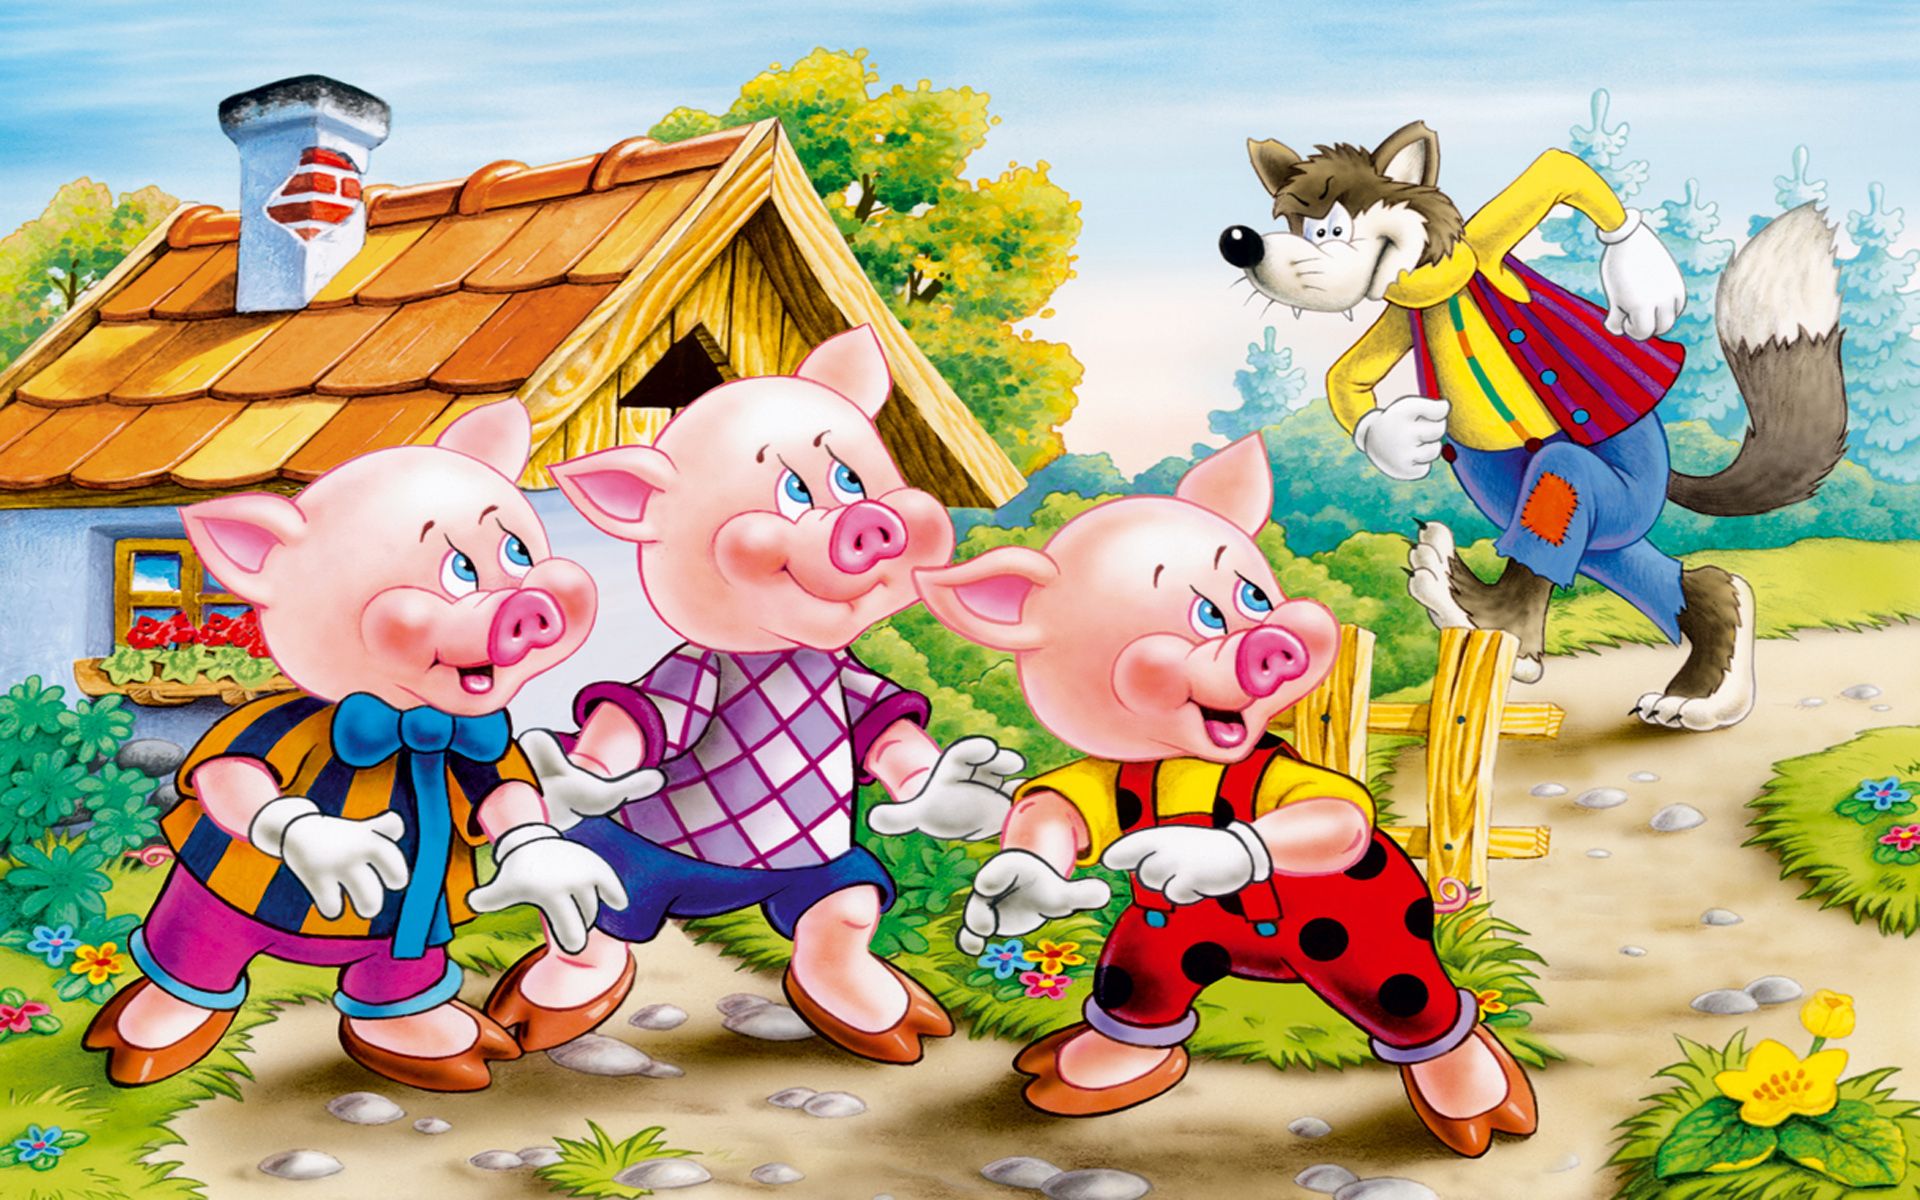 Three Little Pigs And The Wicked Wolf Photo Wallpaper HD 1920x1200, Wallpaper13.com